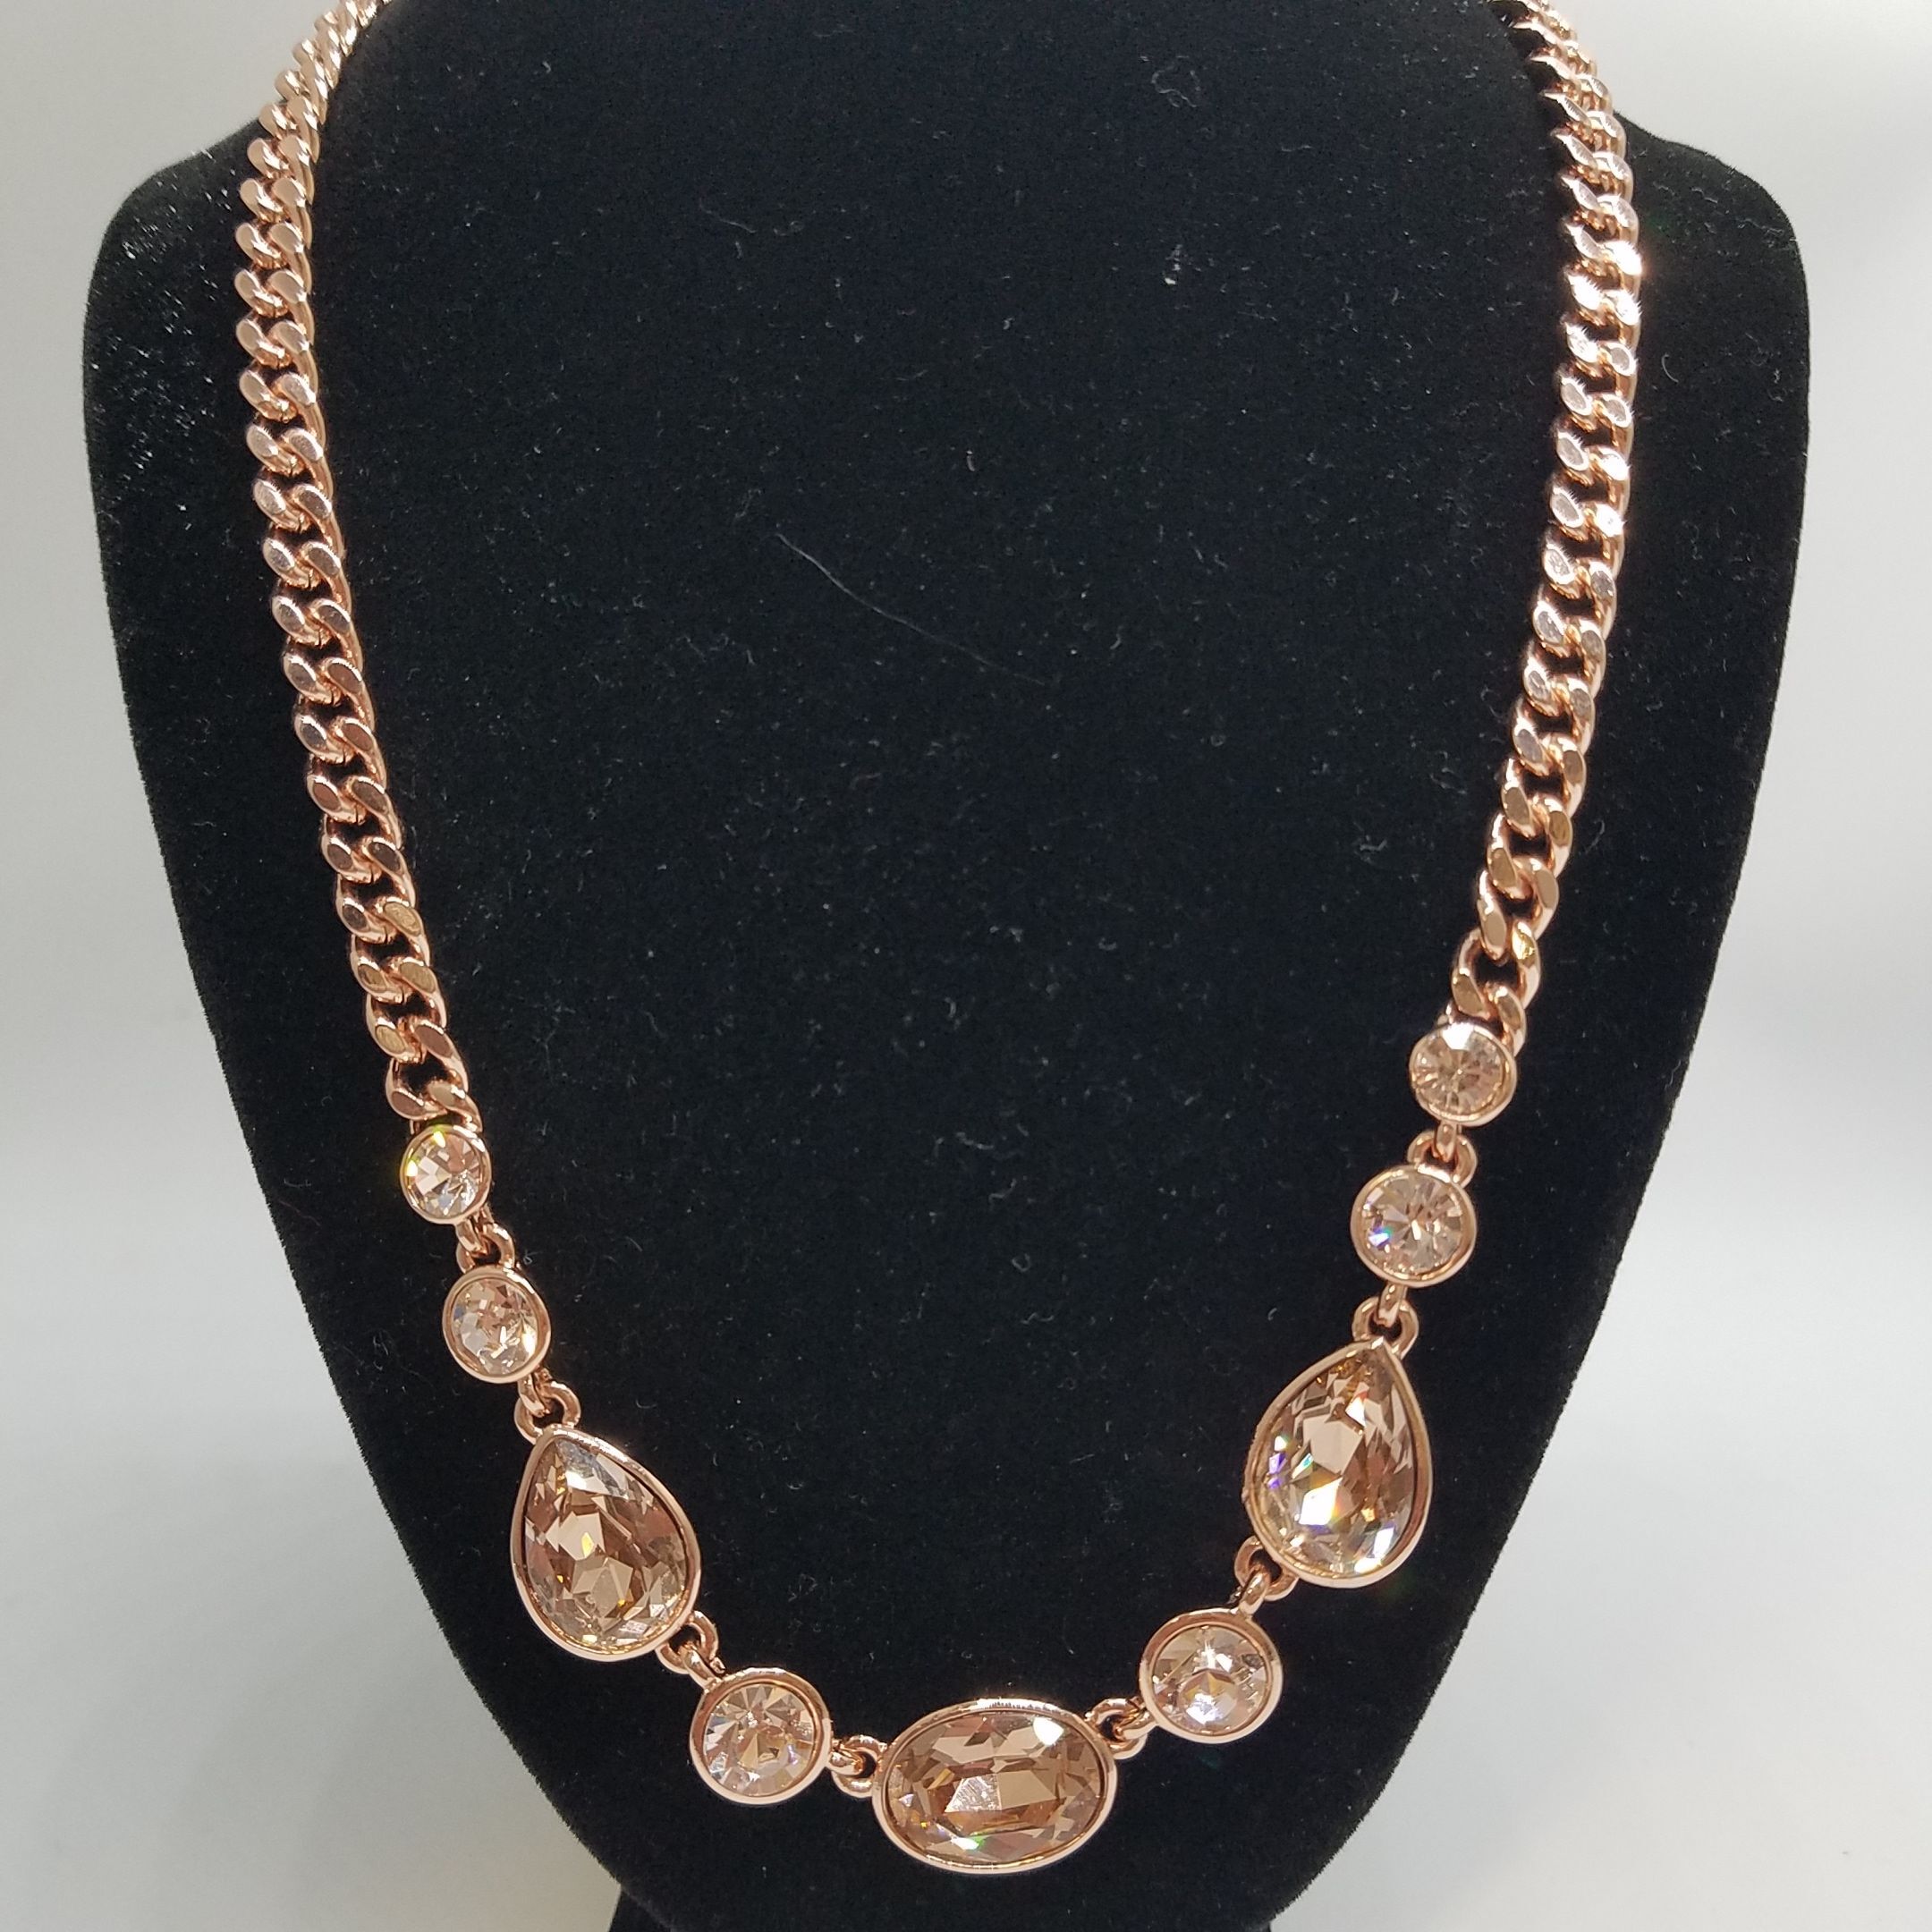 Givenchy Rose Gold Crystal Collar Necklace 1202 | eBay